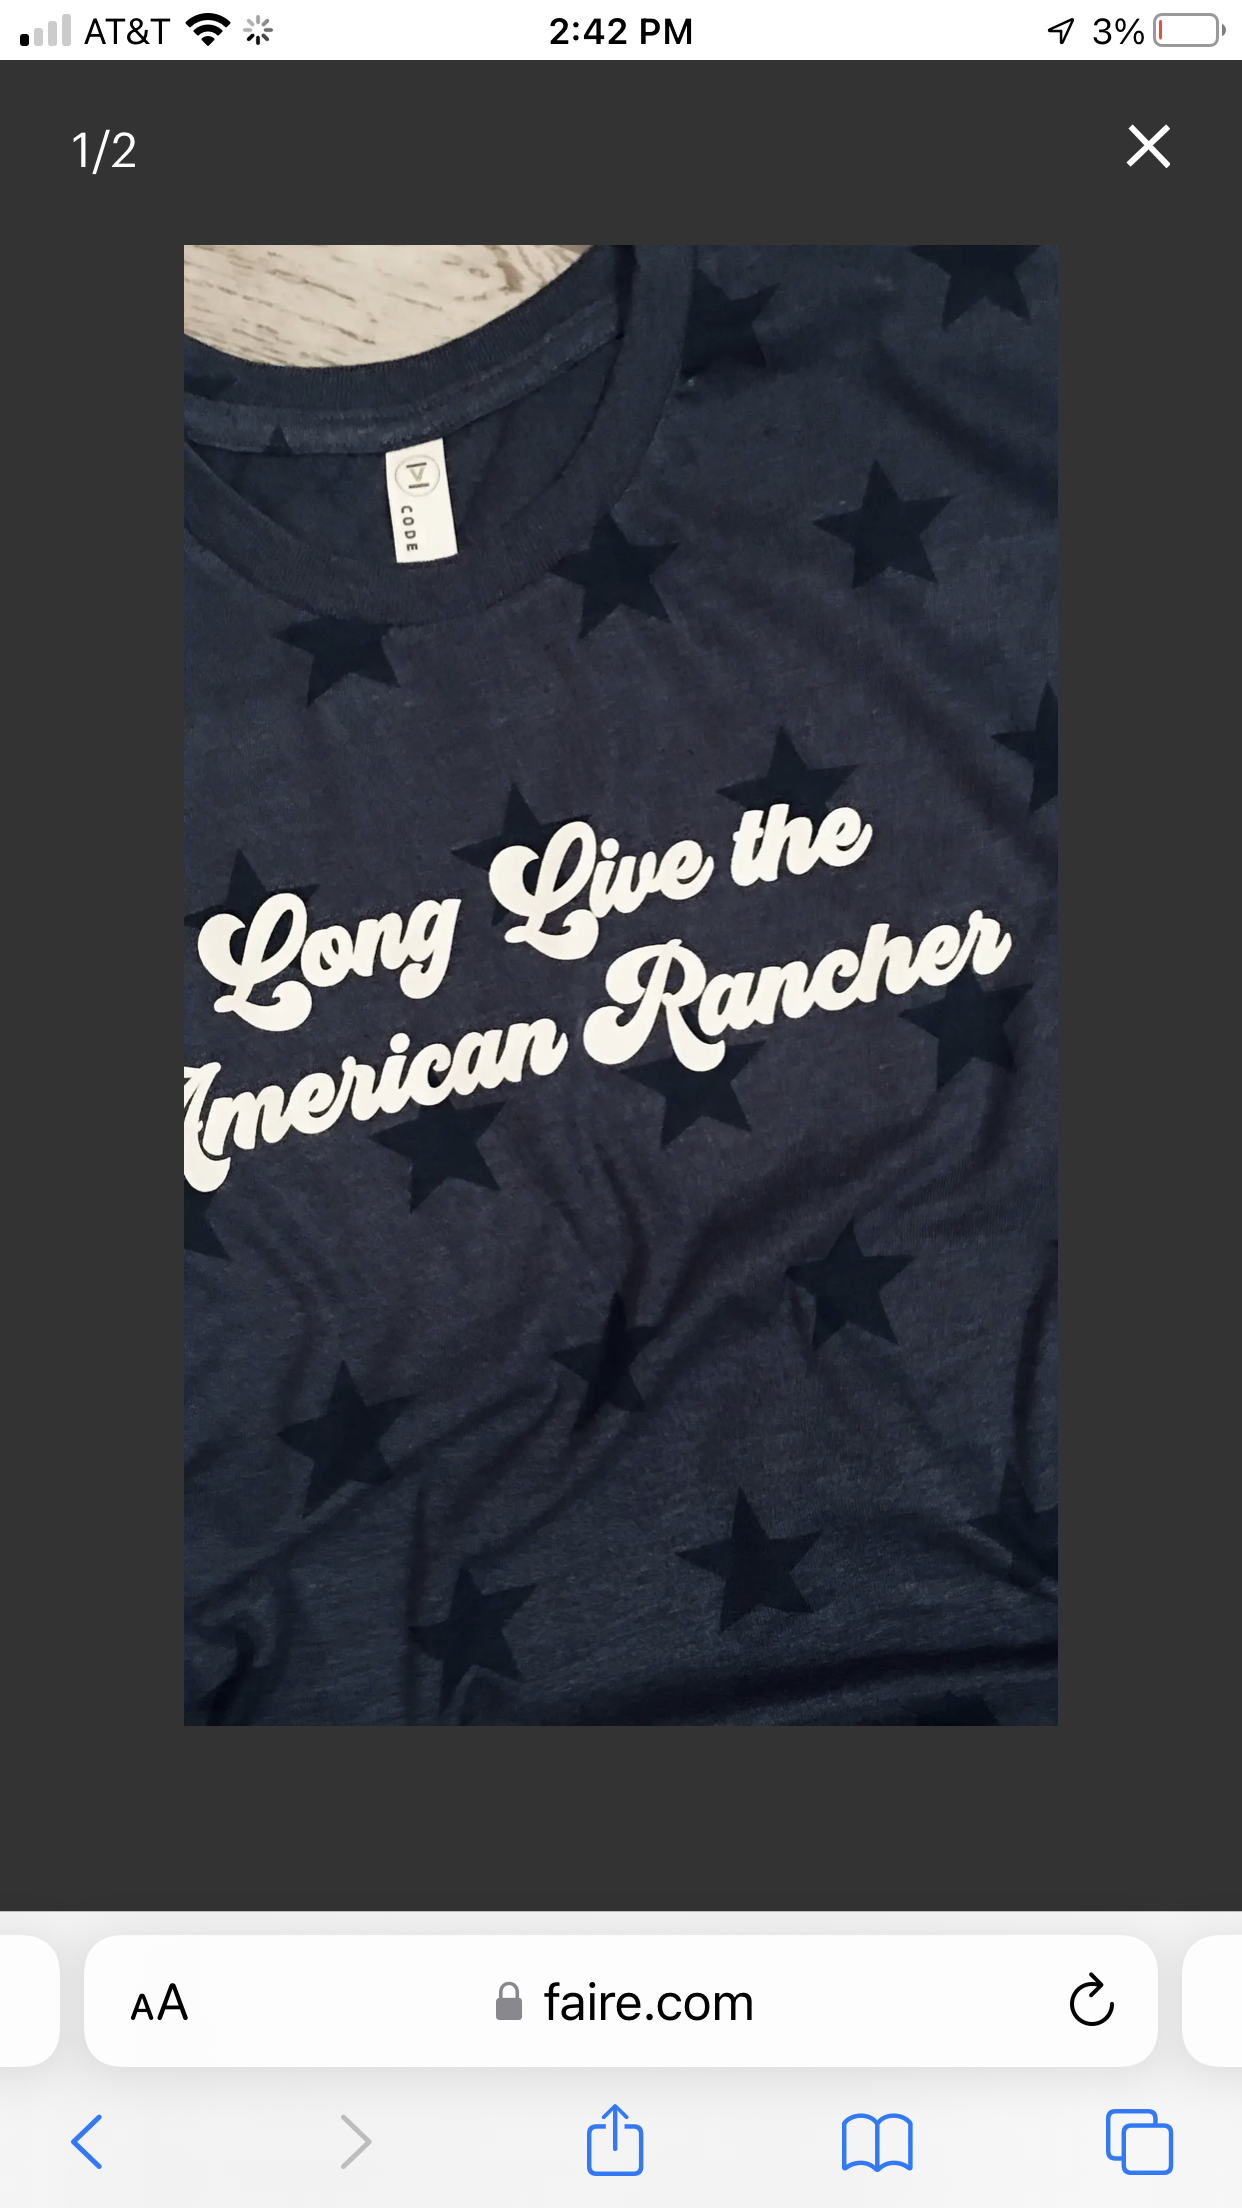 Long live the American Rancher